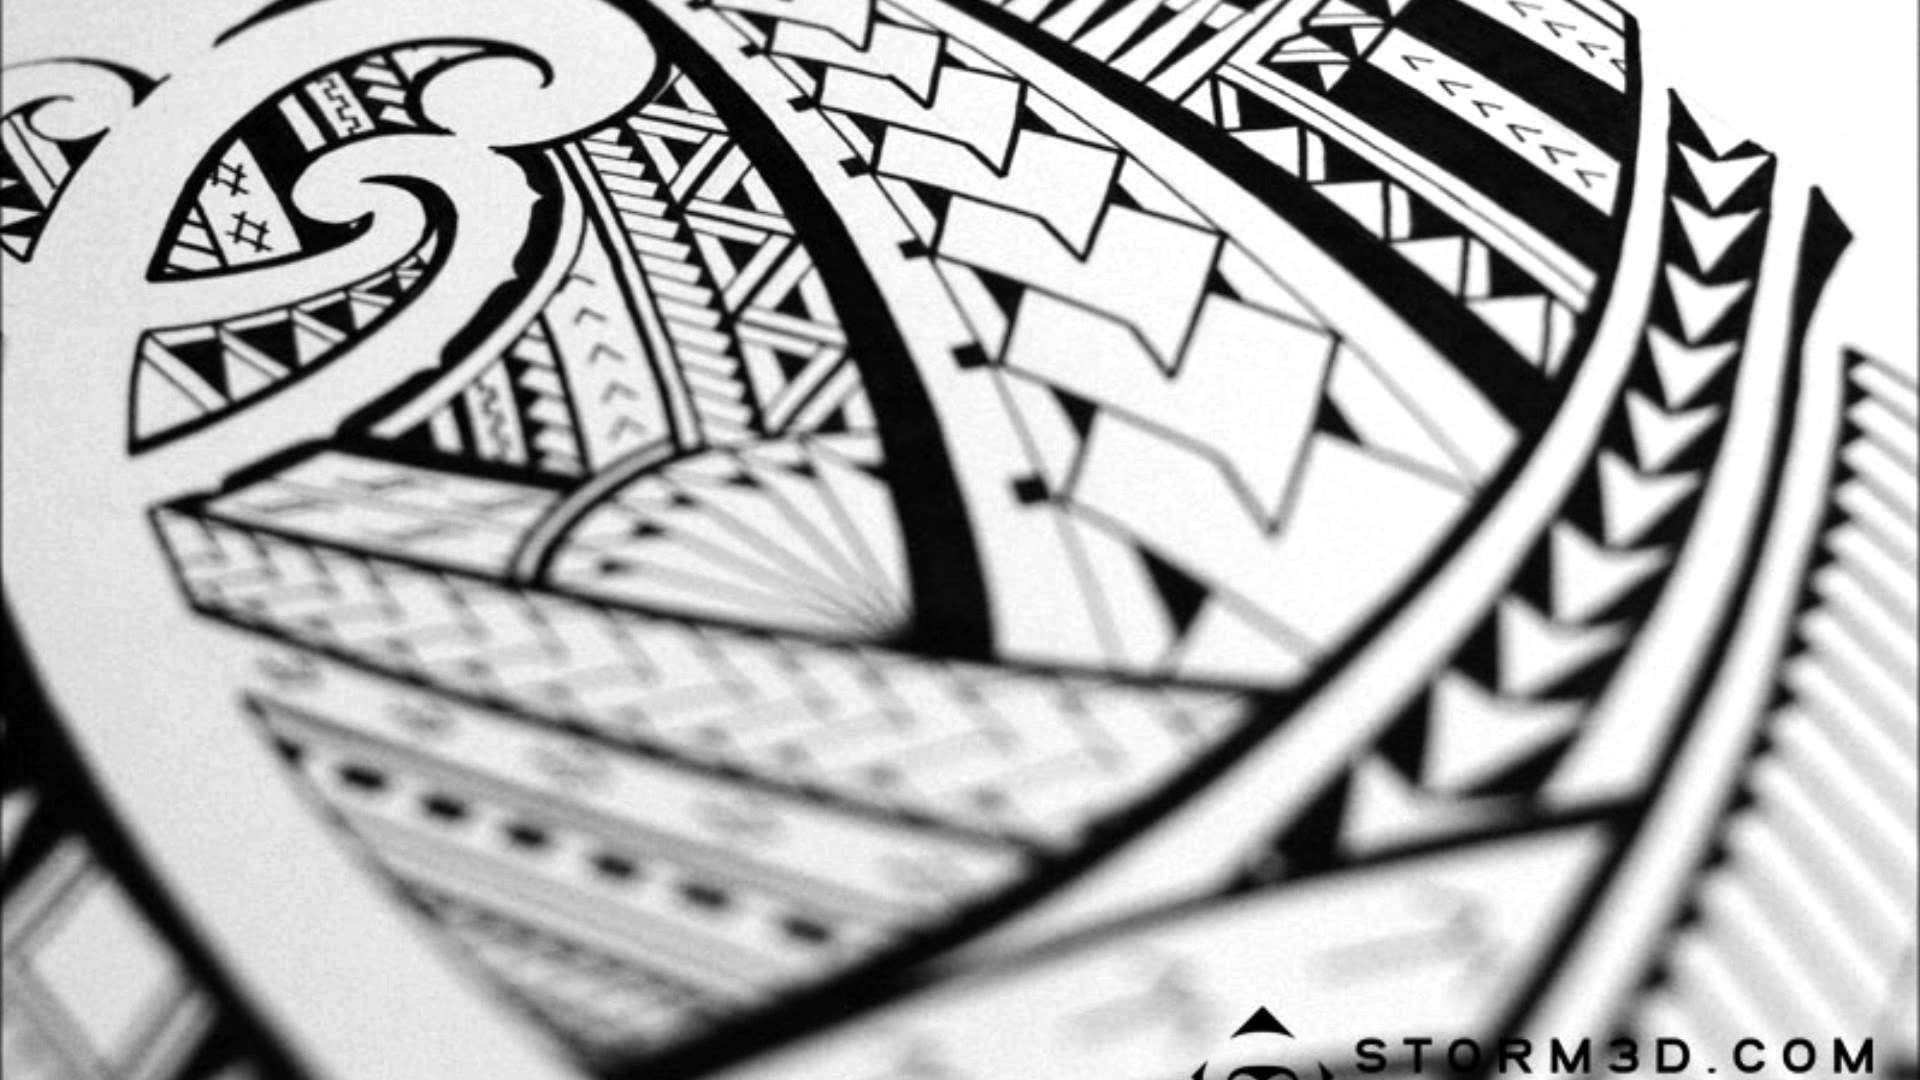 1920x1080 cheap optical sketch design wallpaper drawing a samoan tribal tattoo design  time lapse u youtube with tribal mit buchstaben.